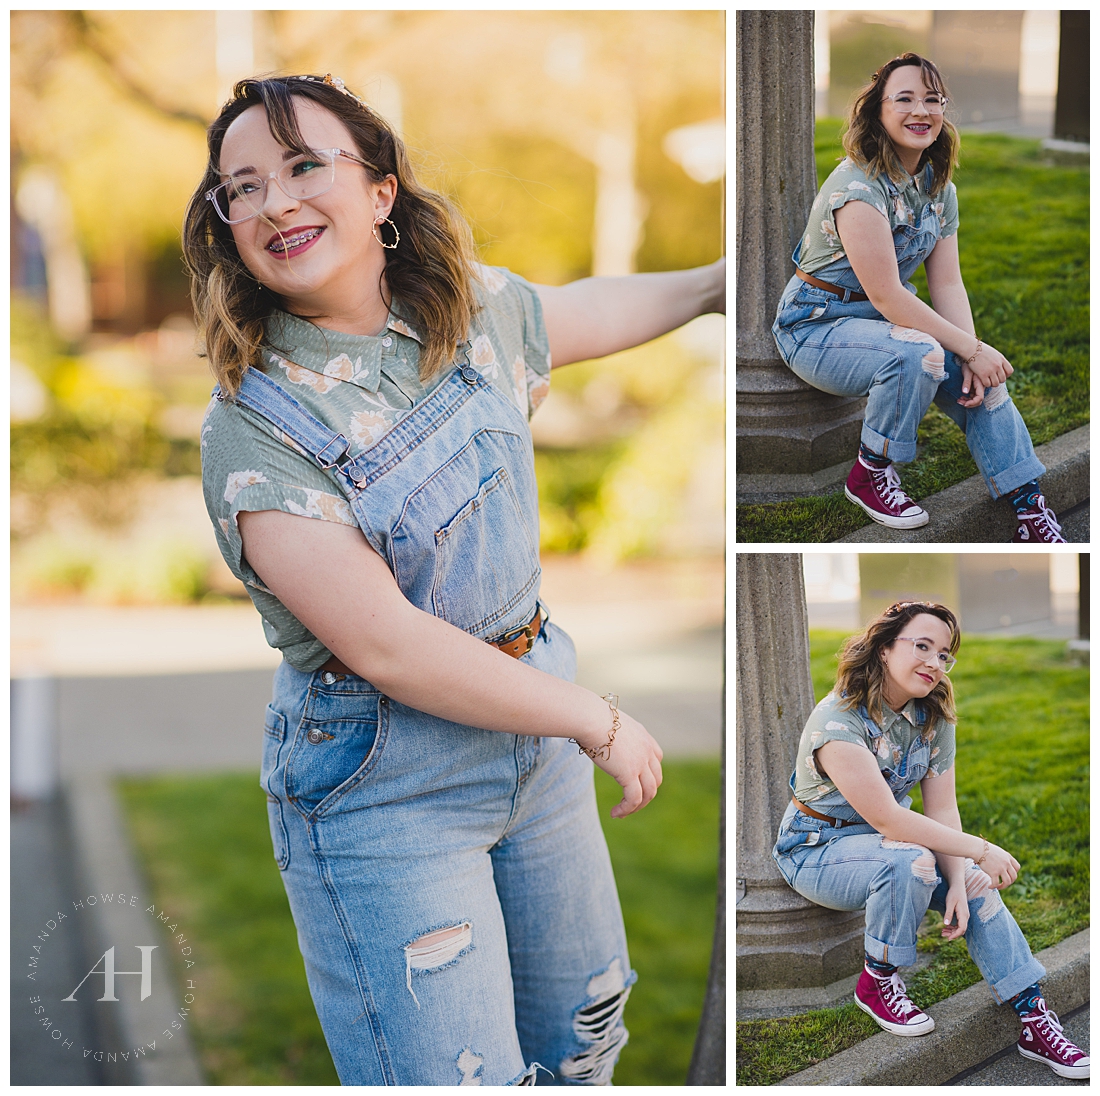 Cute Outdoor Senior Portraits with High School Senior | How to Wear Overalls, Senior Style, Chuck Taylors for Senior Portraits | Photographed by the Best Tacoma Senior Photographer Amanda Howse Photography